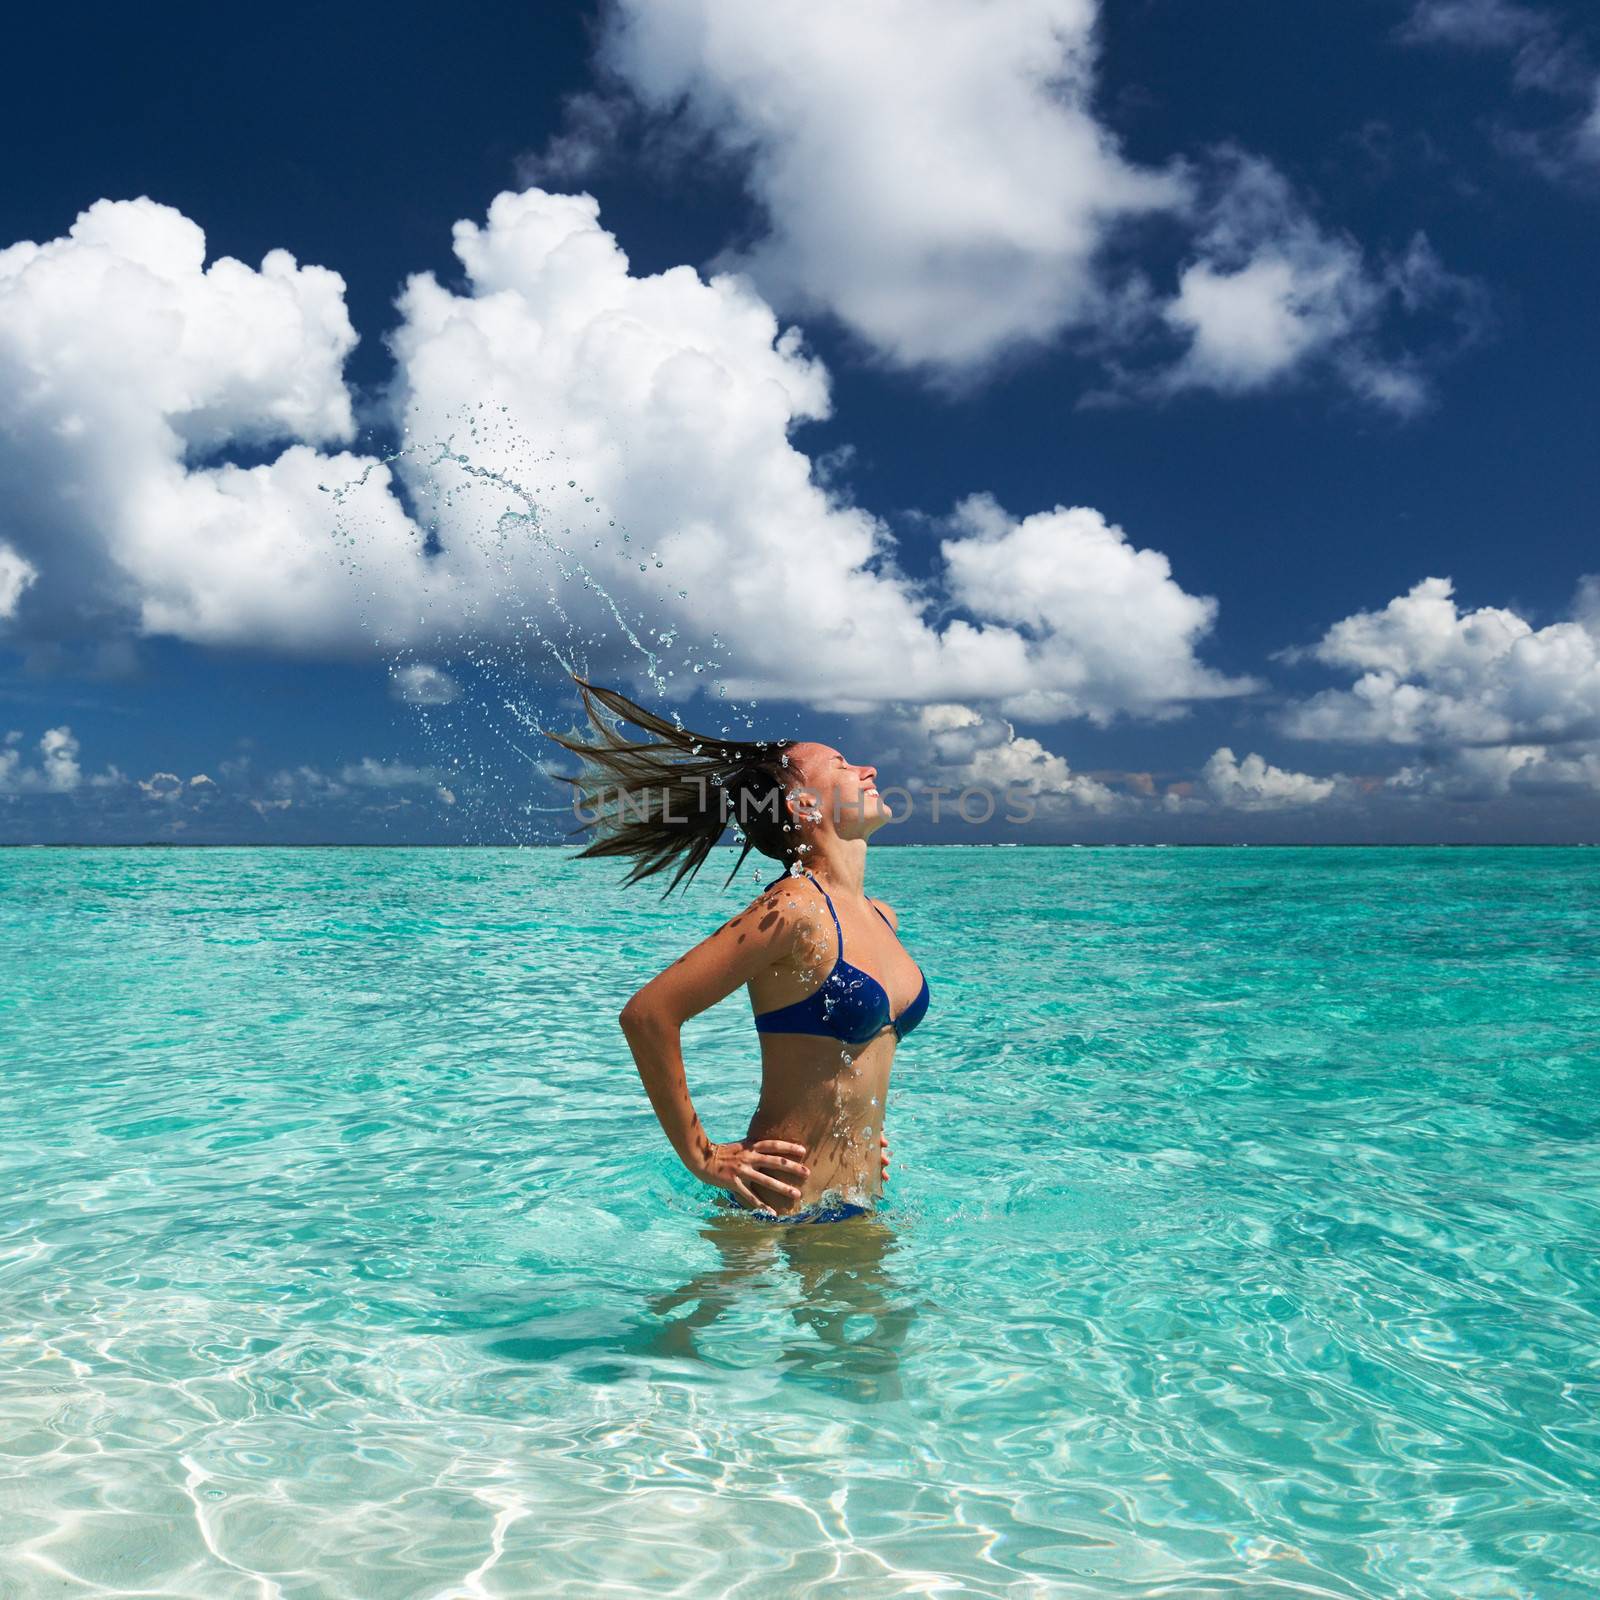 Woman splashing water with hair in the ocean by haveseen